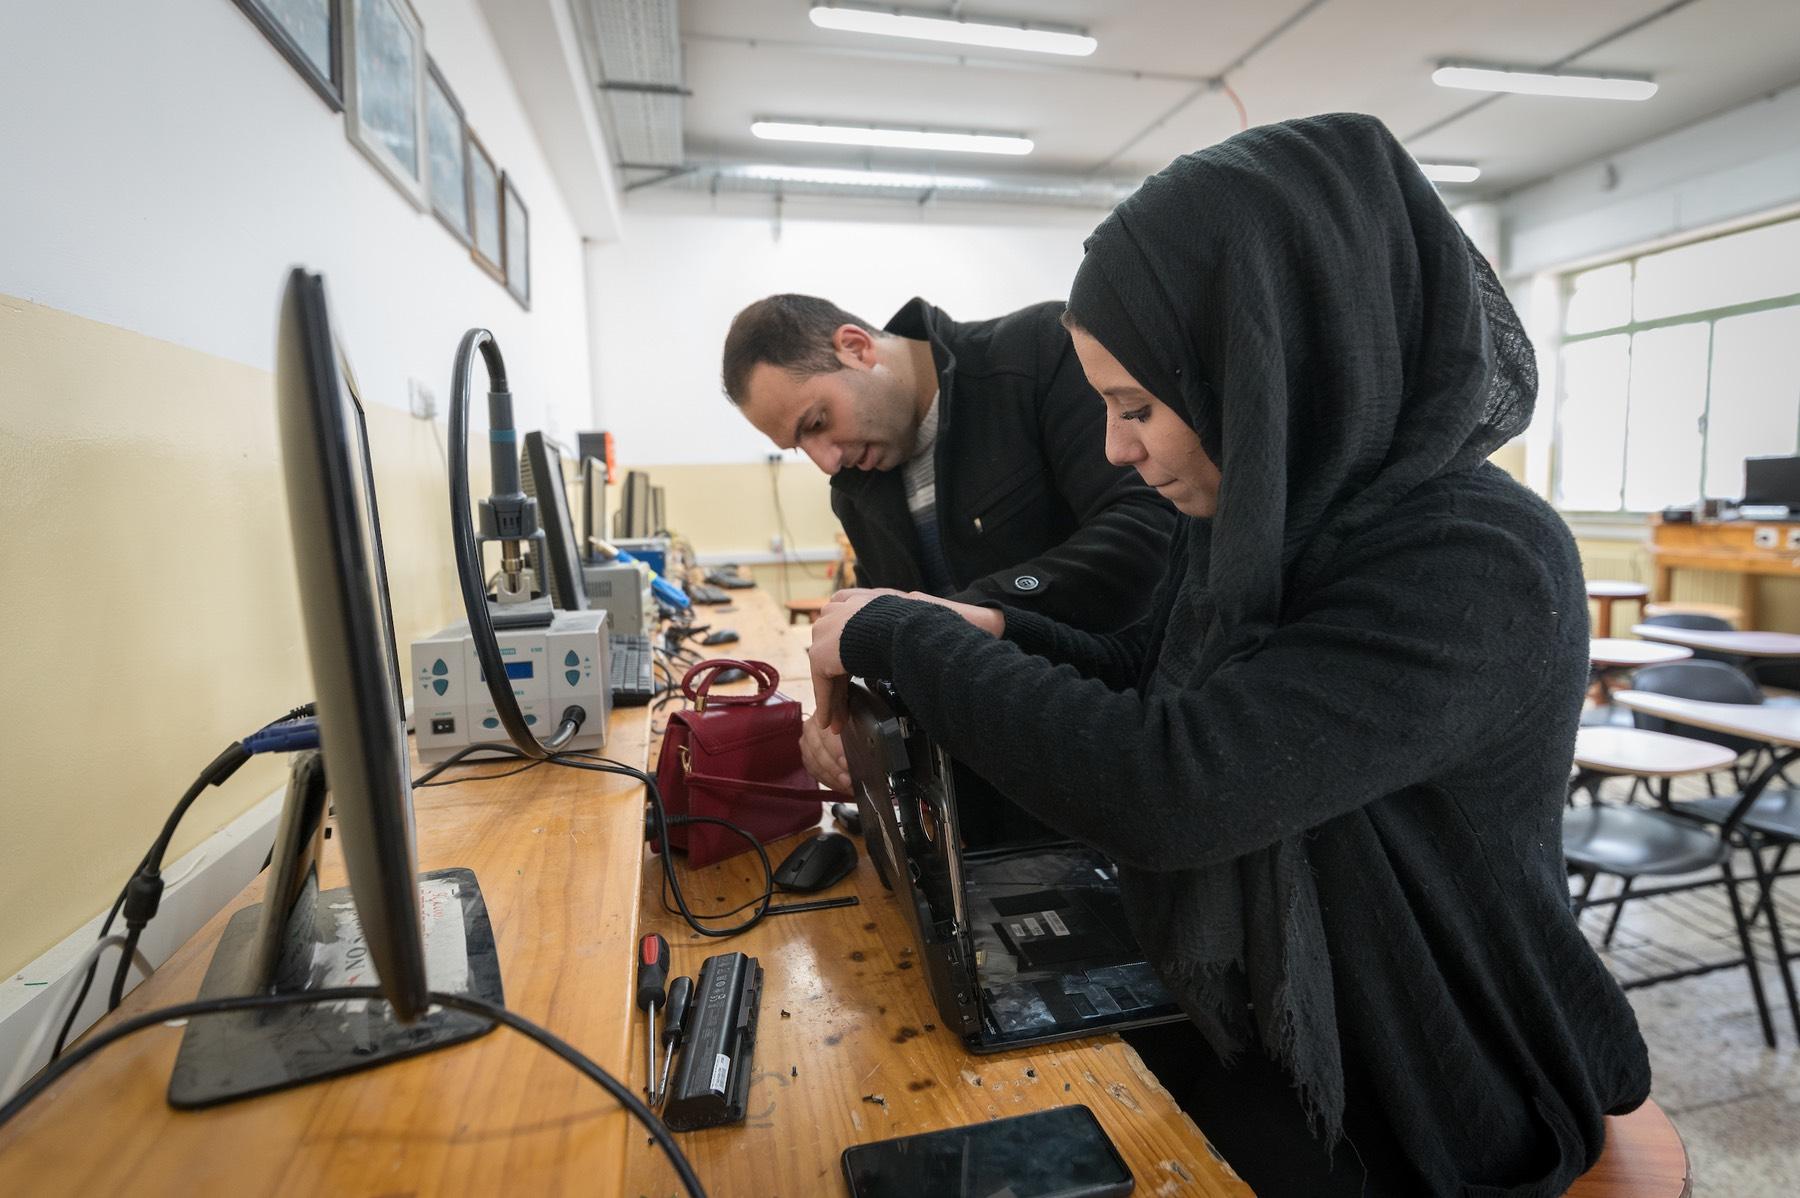 21 January 2023, Ramallah, Palestine: 19-year-old telecommunications student Reham Rajh (right) from Ramallah is at work during a class taught by Anas Shtaya (left) at the Lutheran World Federation’s Vocational Training Centre in Ramallah. The centre currently hosts 141 students across eight different training programmes. This school year, 85 of the students are female. Photo: LWF/ Albin Hillert